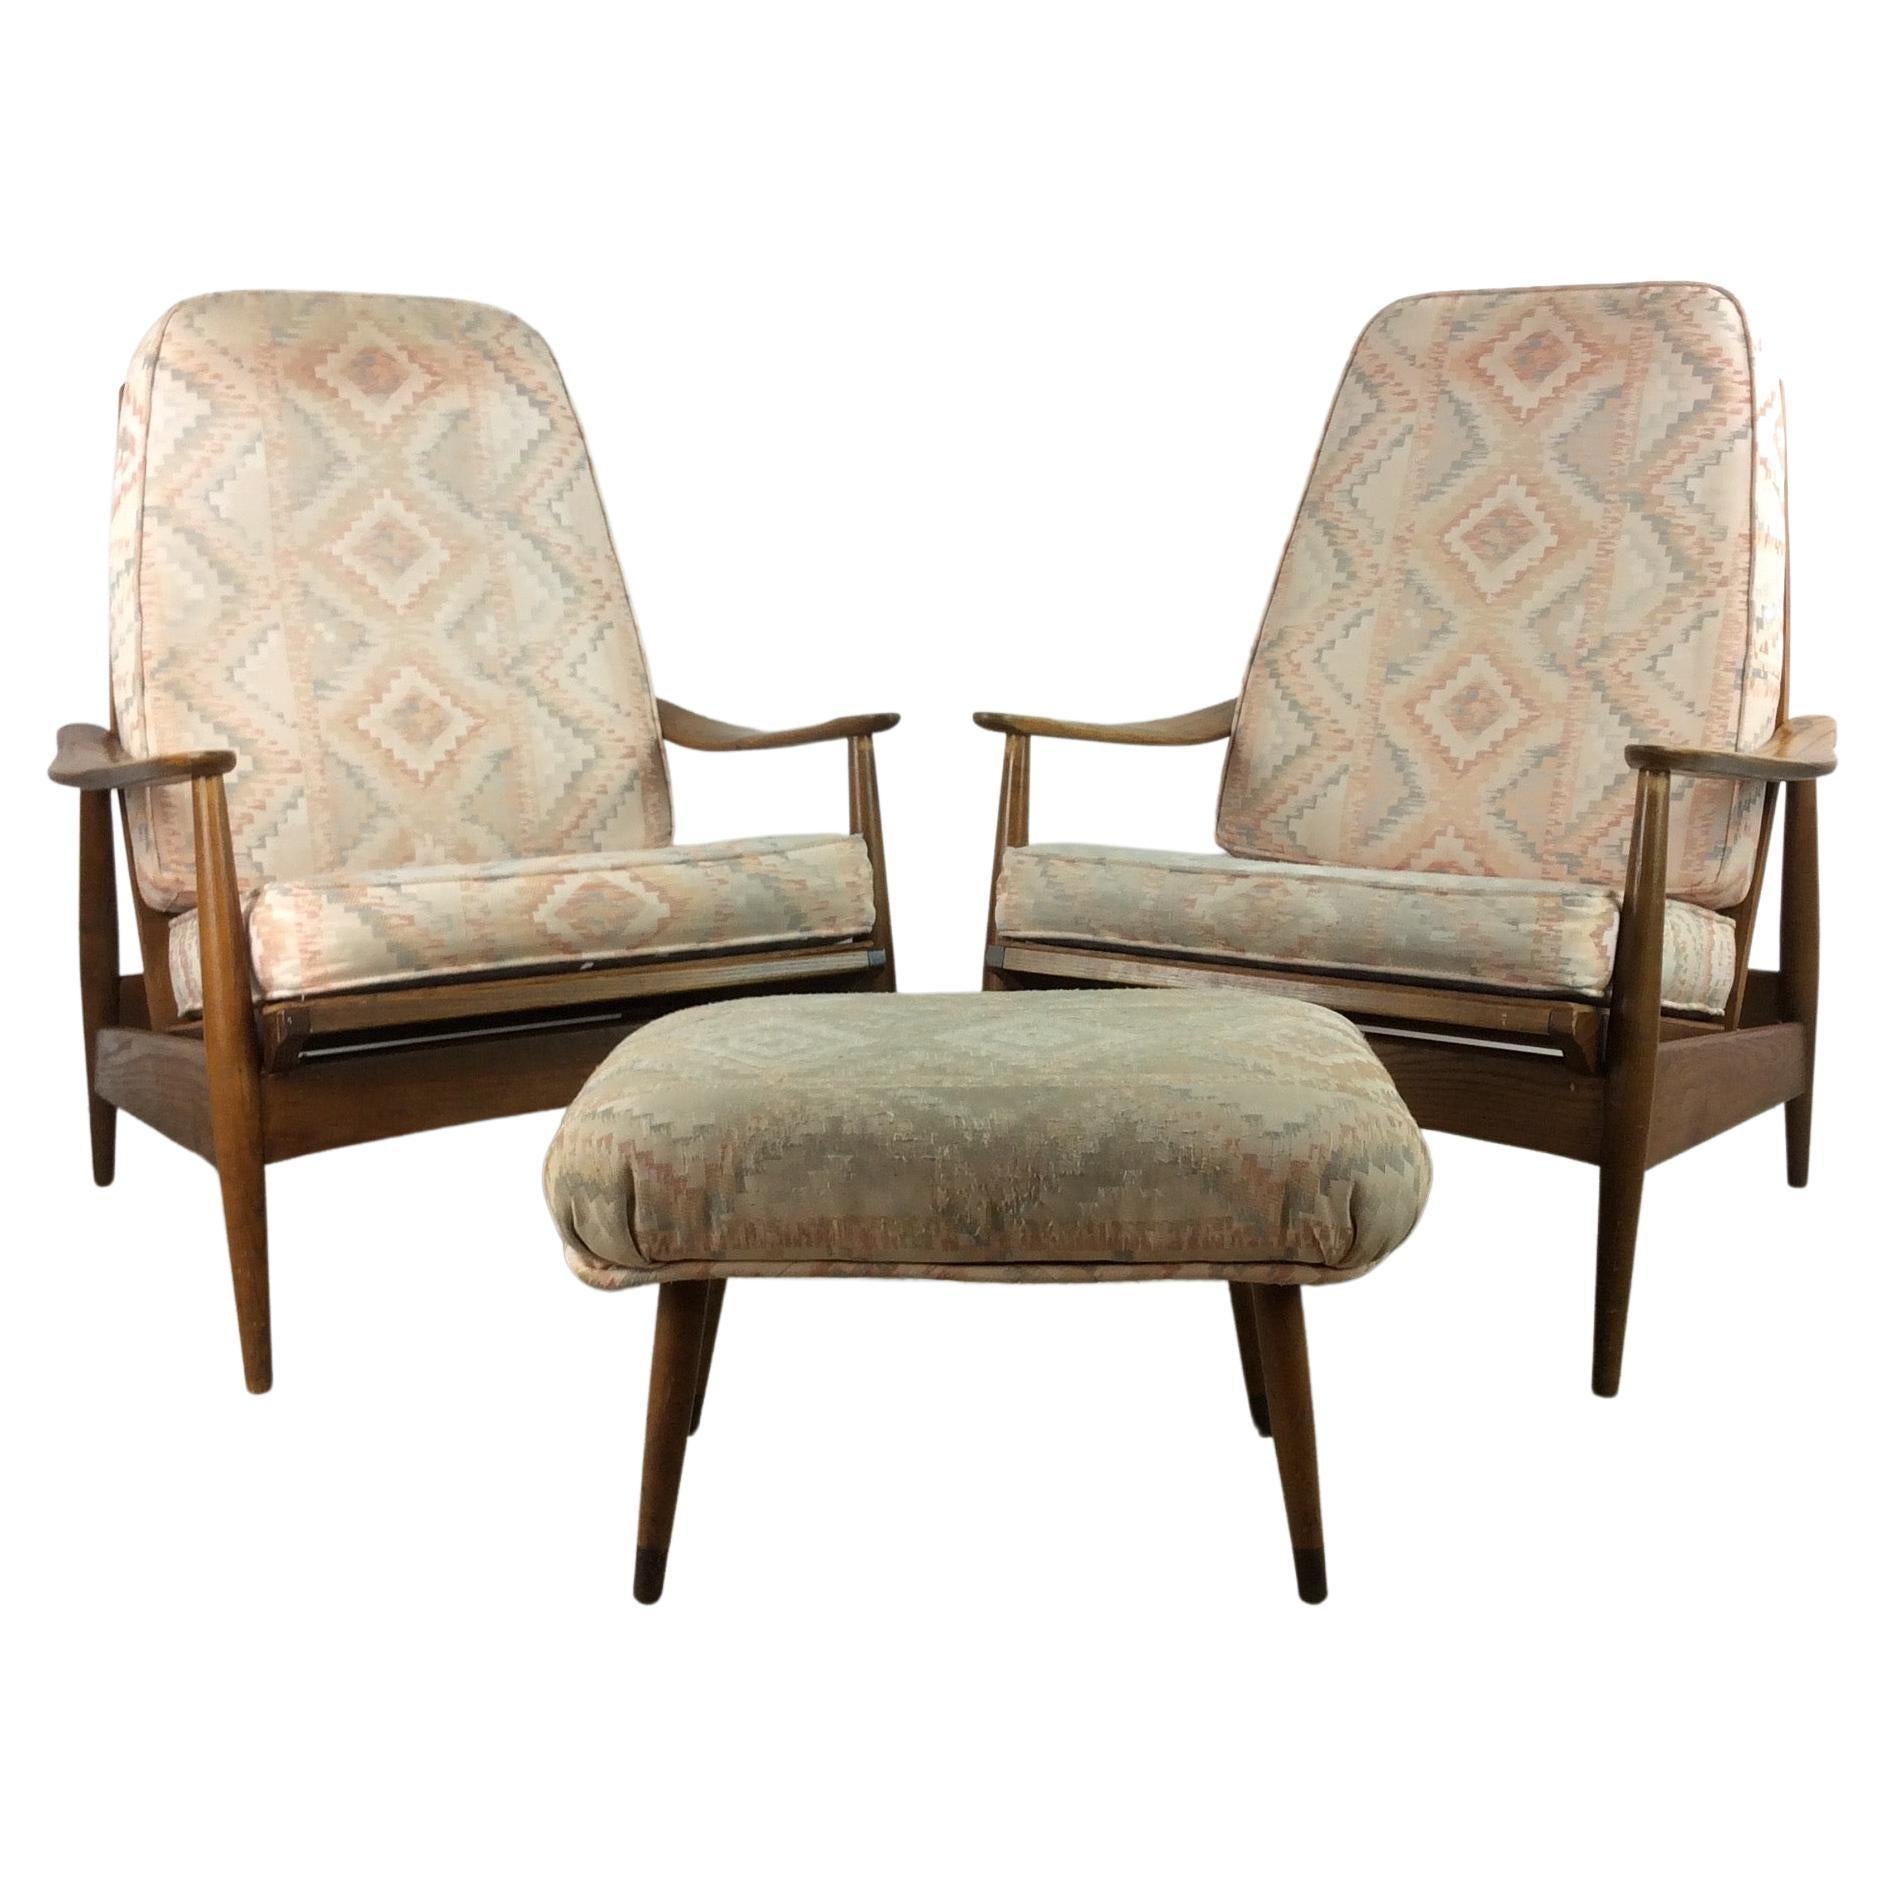 Pair of Mid Century Modern Lounge Chairs with Ottoman